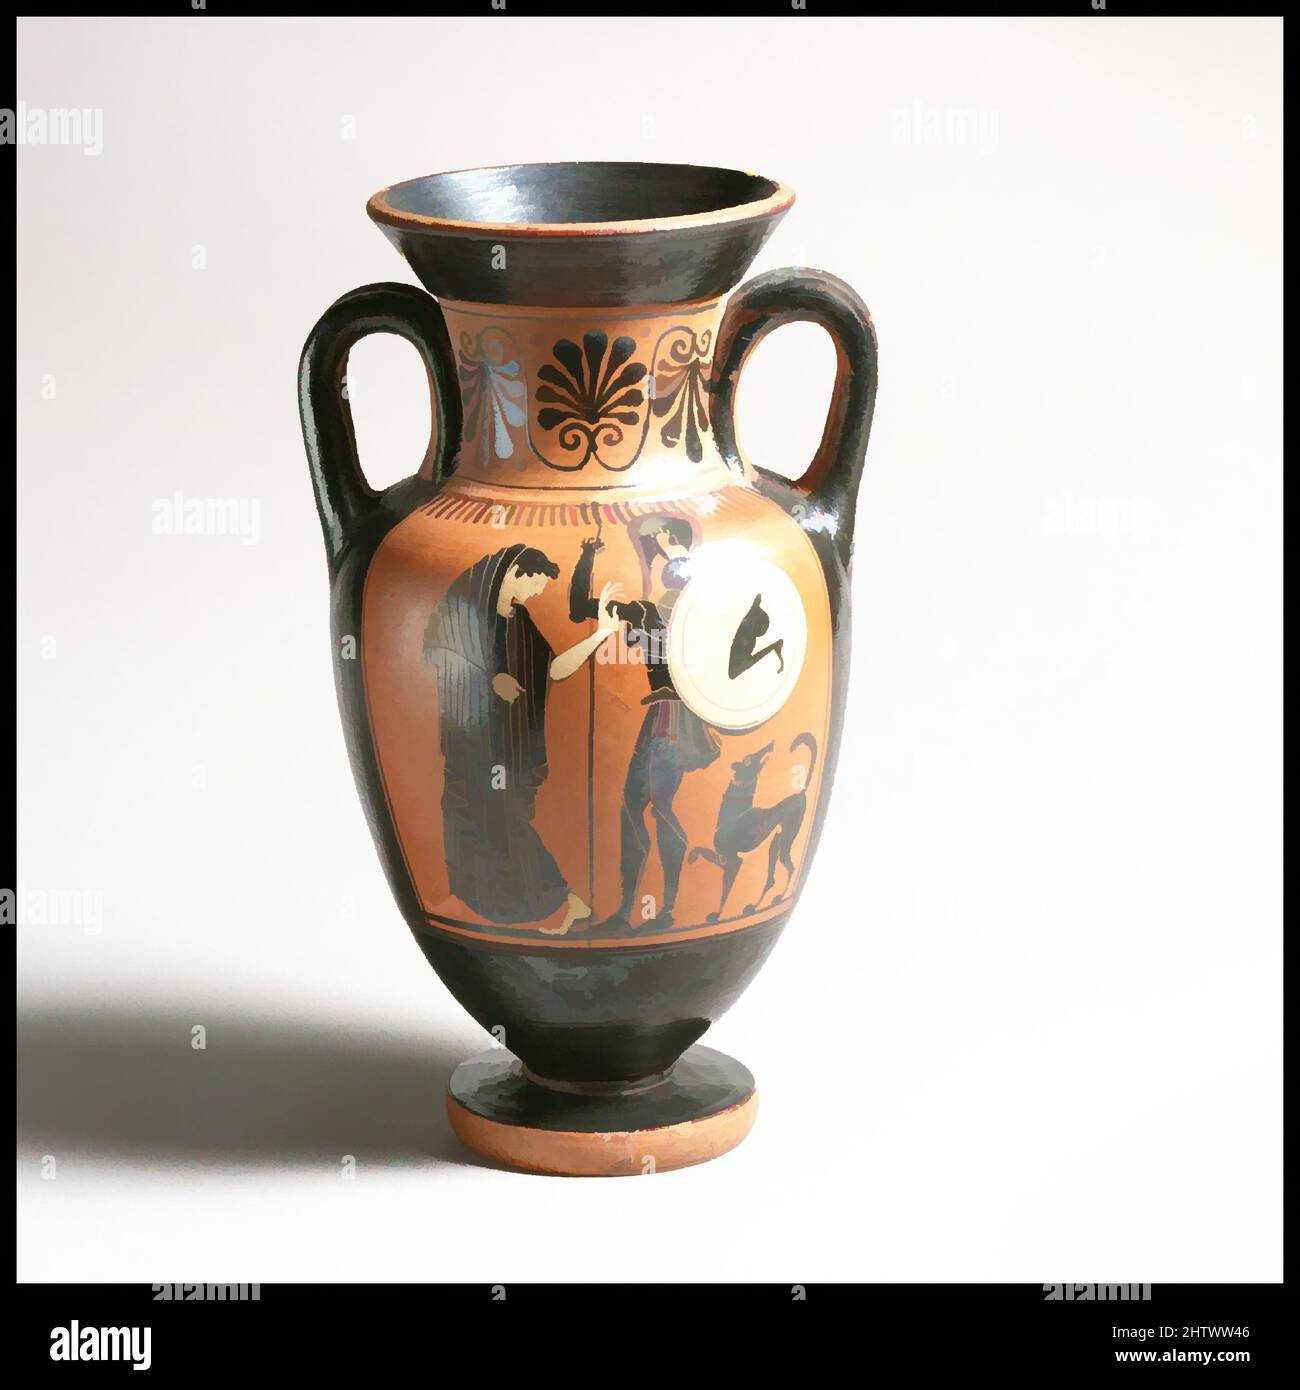 Art inspired by Terracotta neck-amphora (jar), Archaic, ca. 500 B.C., Greek, Attic, Terracotta; black-figure, H. 7 7/16 in. (18.9 cm), Vases, Obverse, Aeneas rescuing his father, Anchises, during the fall of Troy, Reverse, woman and warrior. Aeneas carrying his aged father, Anchises, Classic works modernized by Artotop with a splash of modernity. Shapes, color and value, eye-catching visual impact on art. Emotions through freedom of artworks in a contemporary way. A timeless message pursuing a wildly creative new direction. Artists turning to the digital medium and creating the Artotop NFT Stock Photo